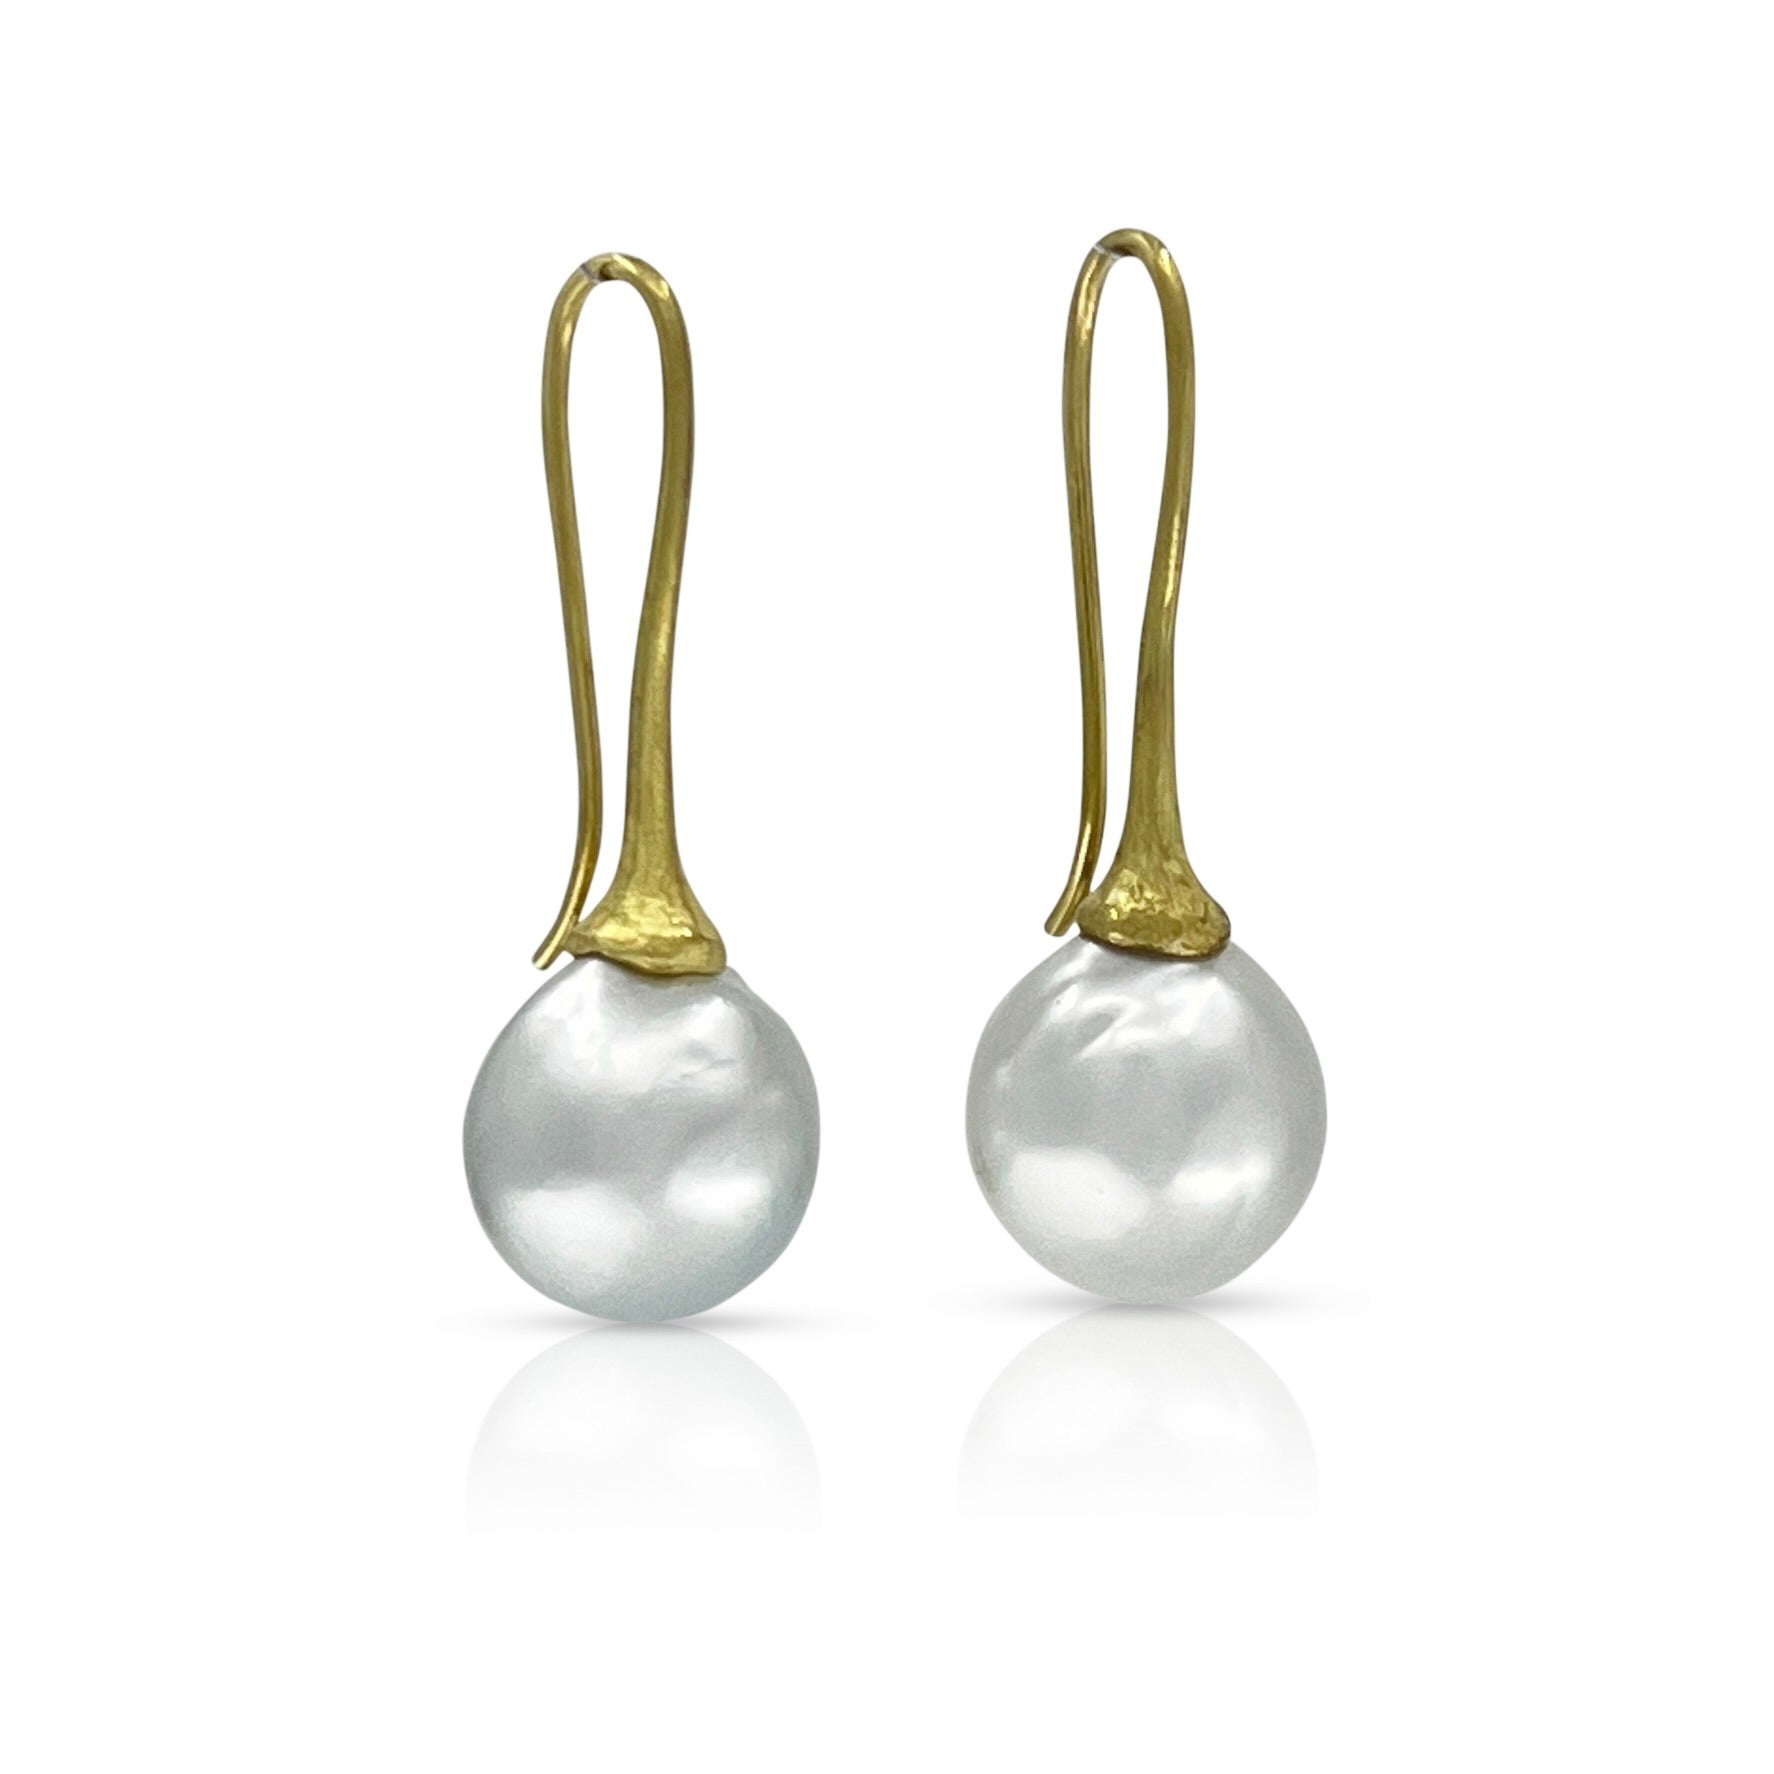 Look Graceful and Forever Young in Alluring Pearl Earrings